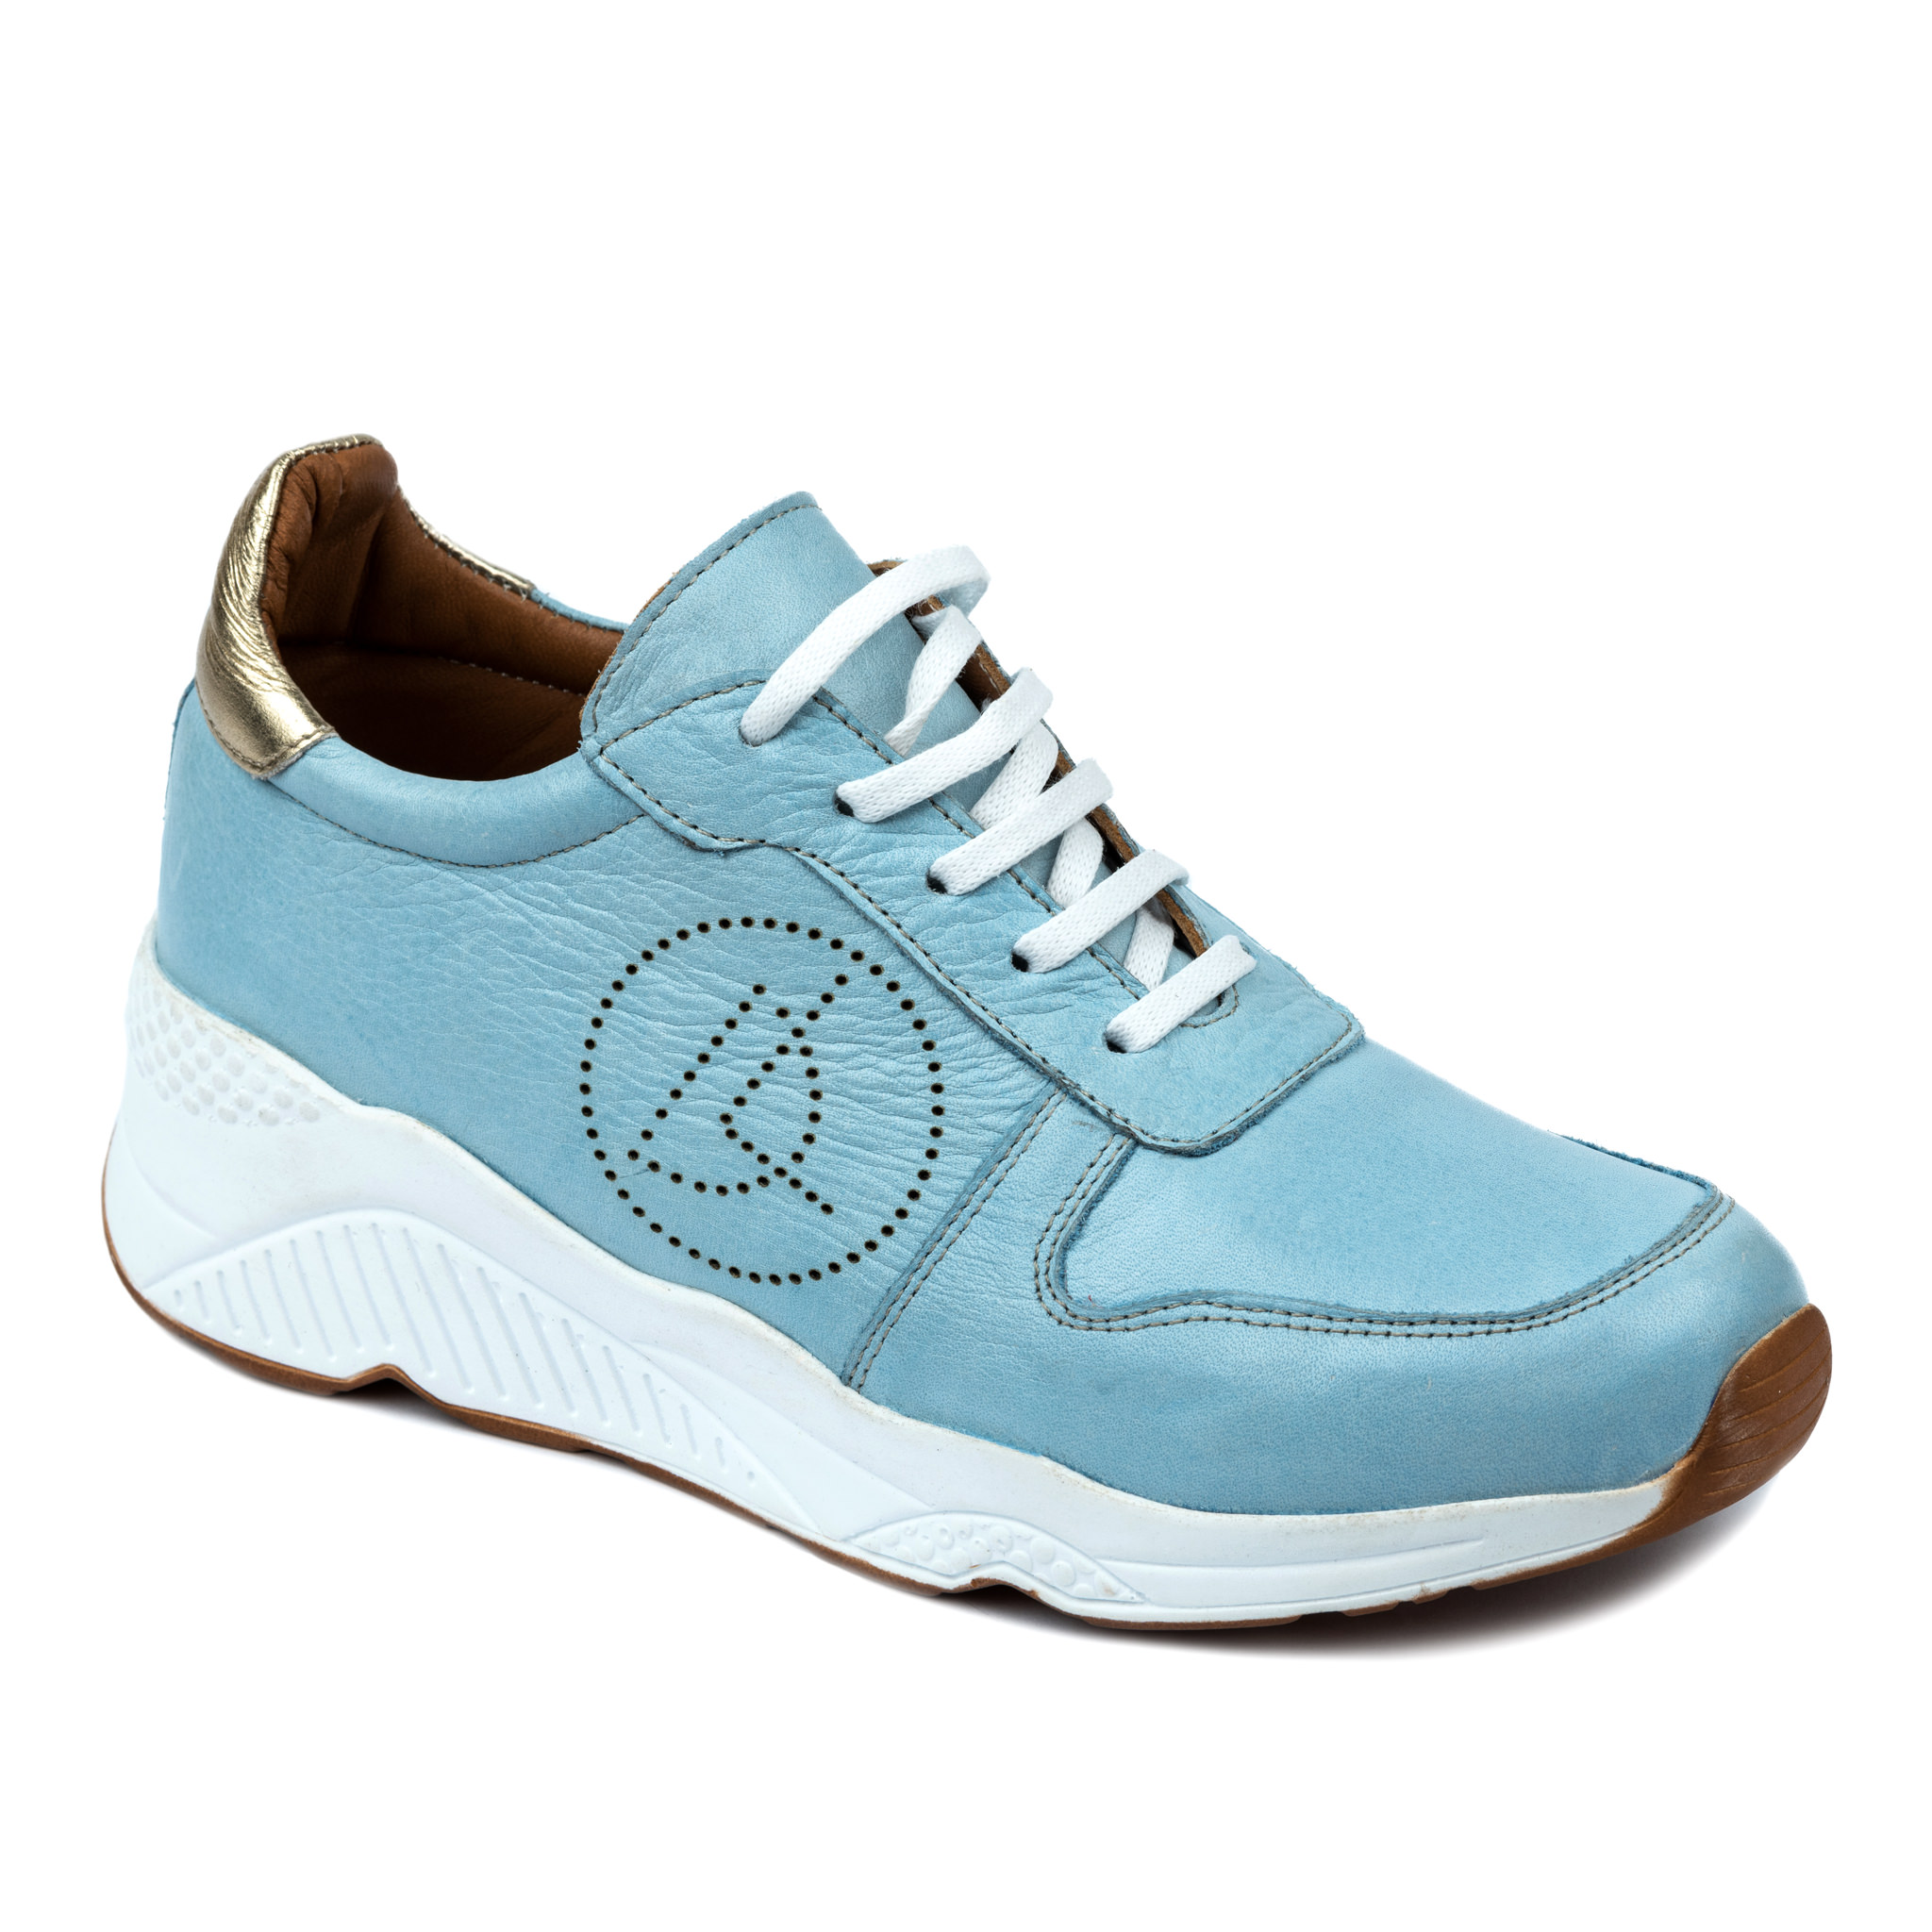 Leather sneakers A543 - BLUE